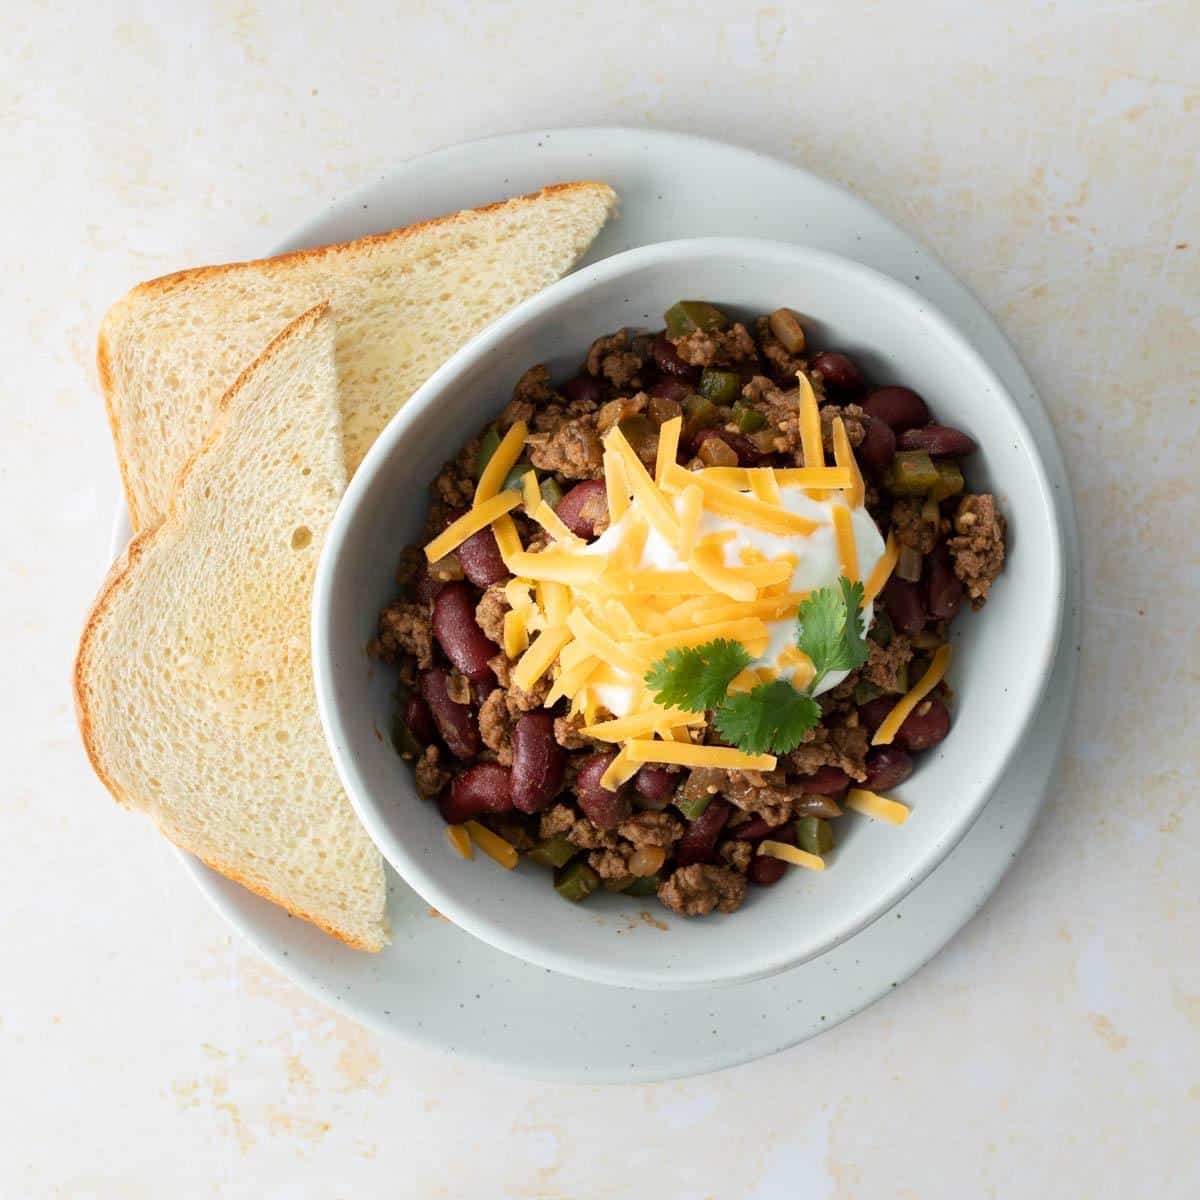 chili with toppings and slices of bread on side